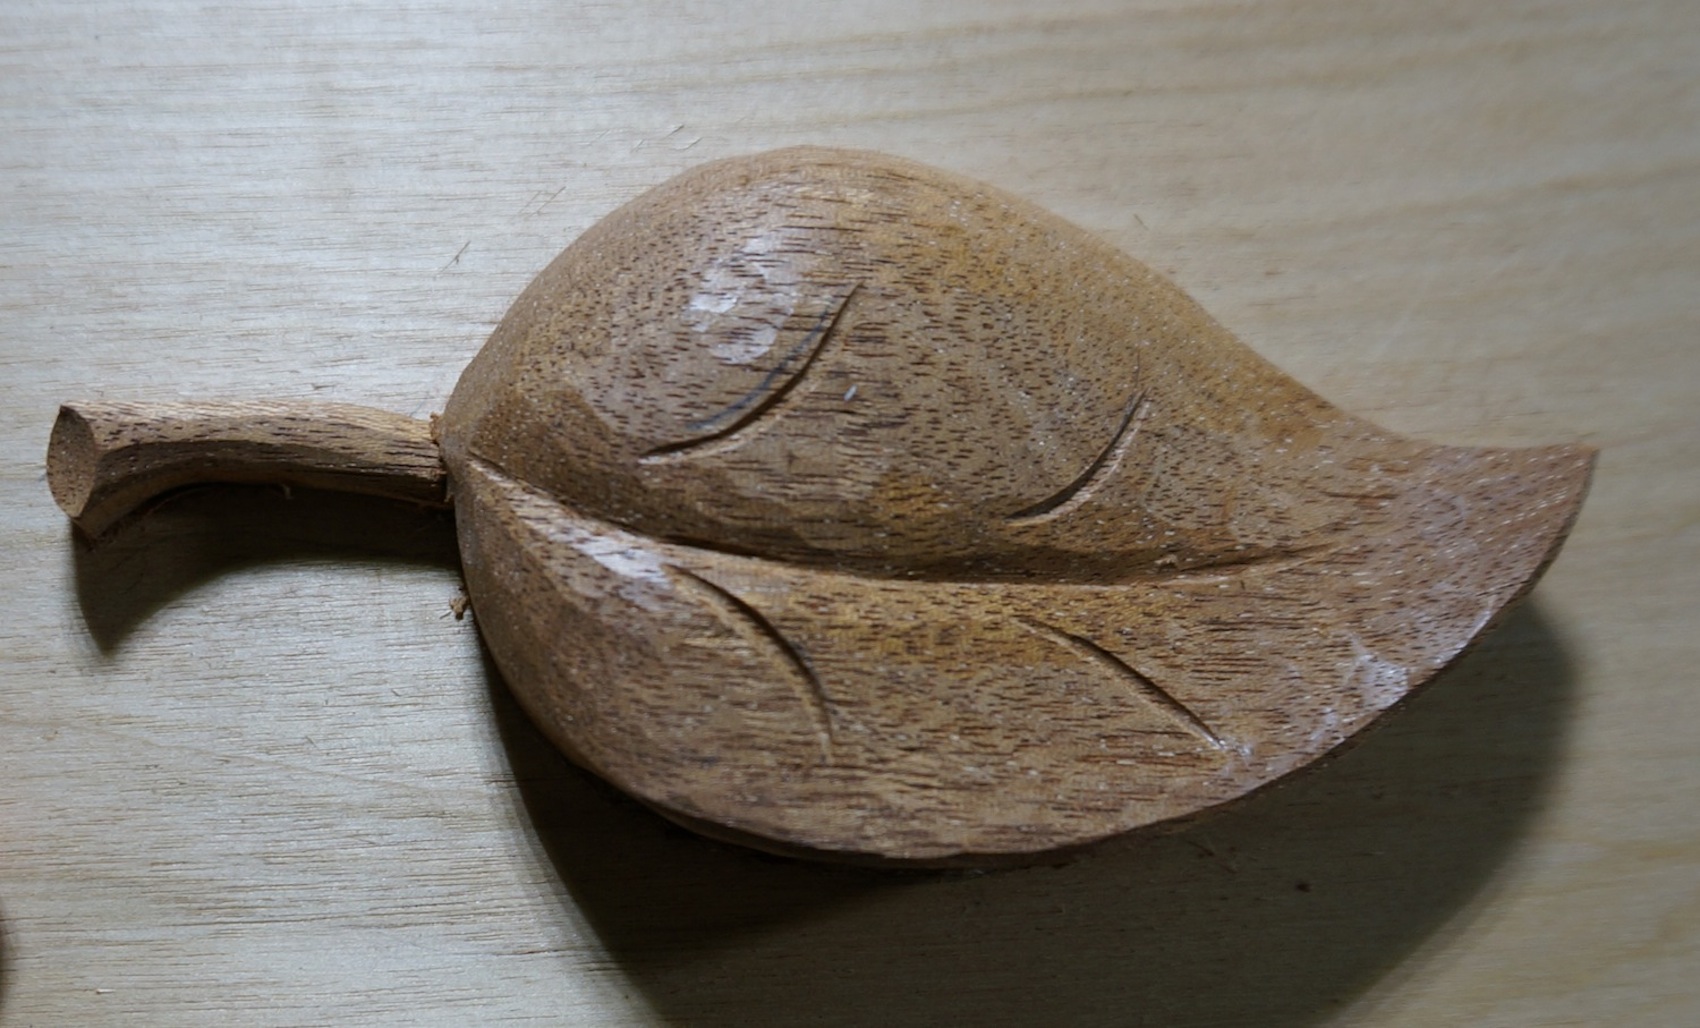 New Video on Carving a Simple Leaf - Mary May - Woodcarver